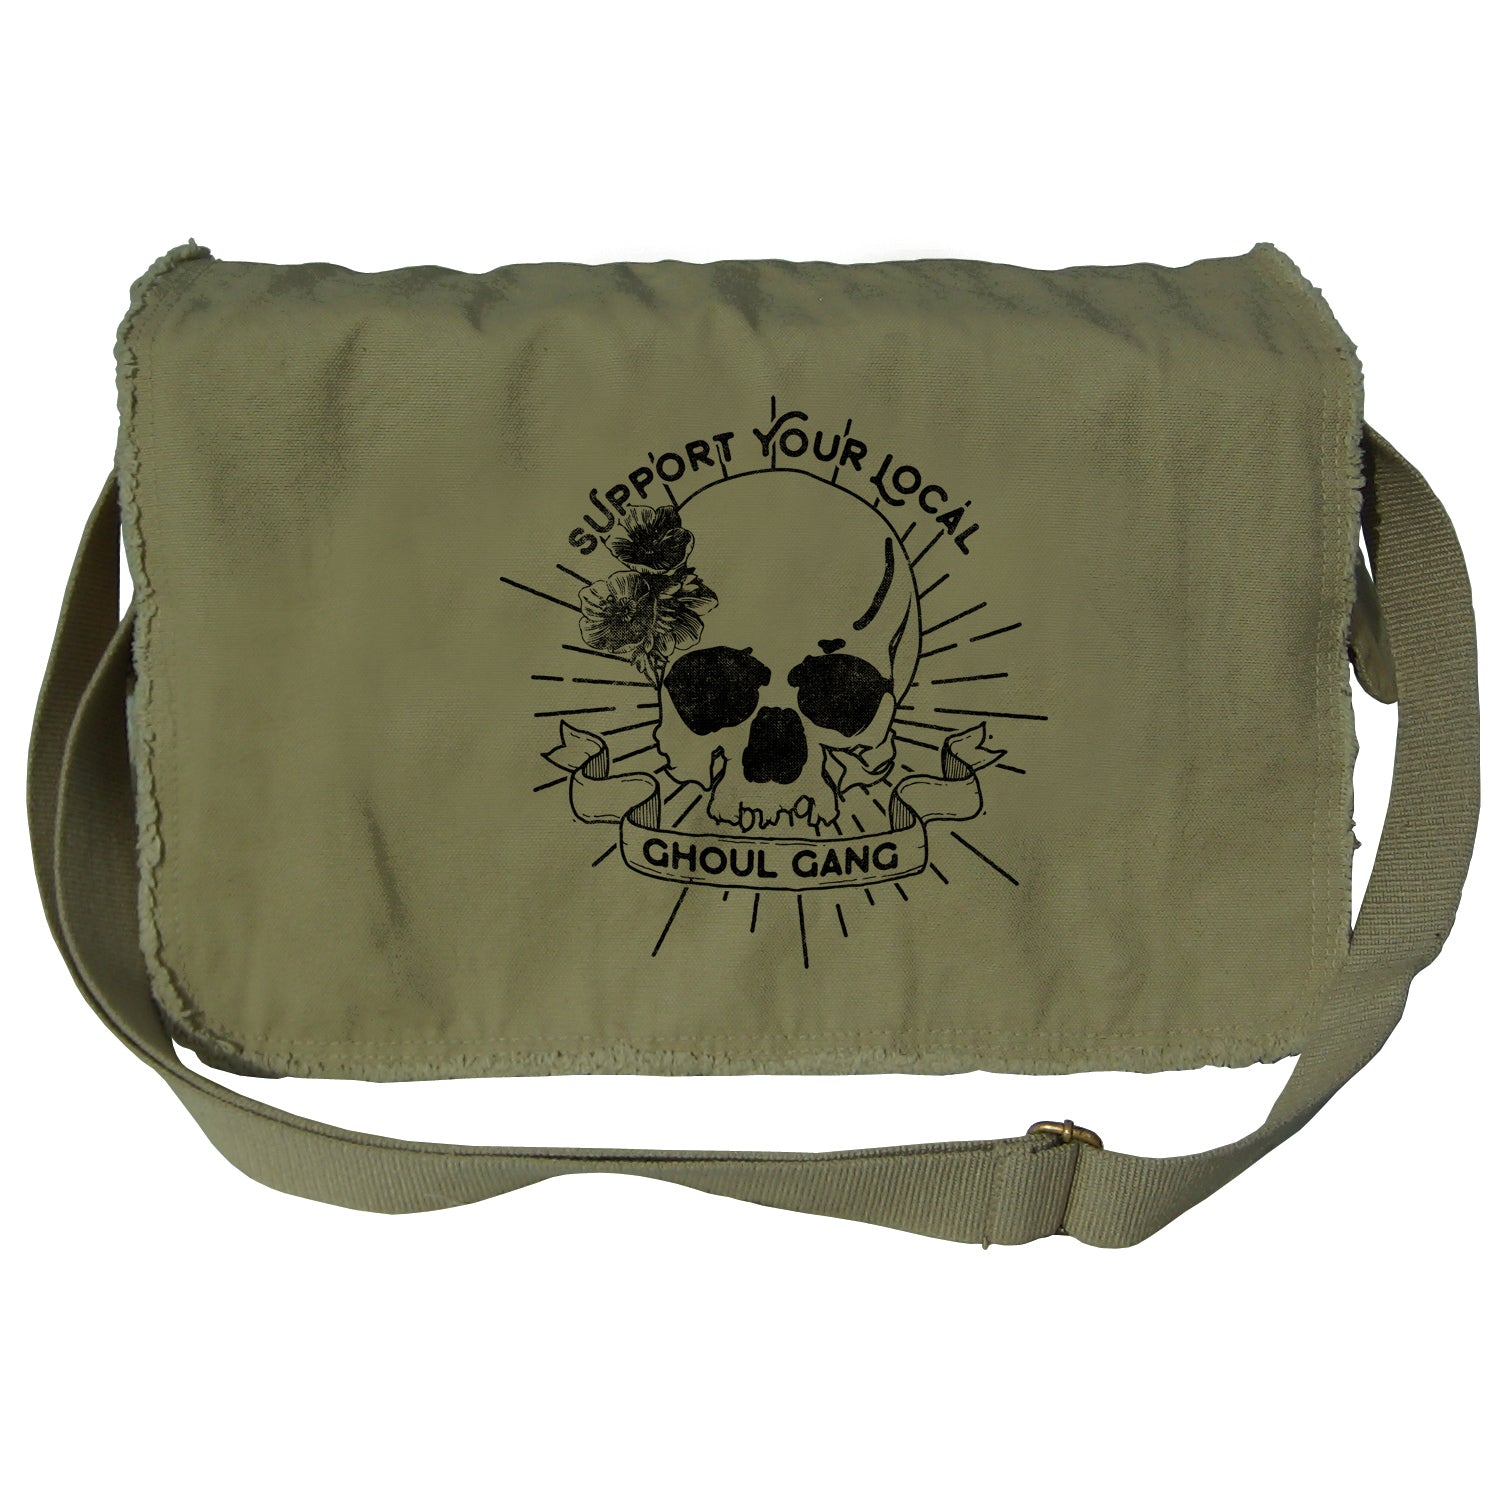 Support Your Local Ghoul Gang Messenger Bag